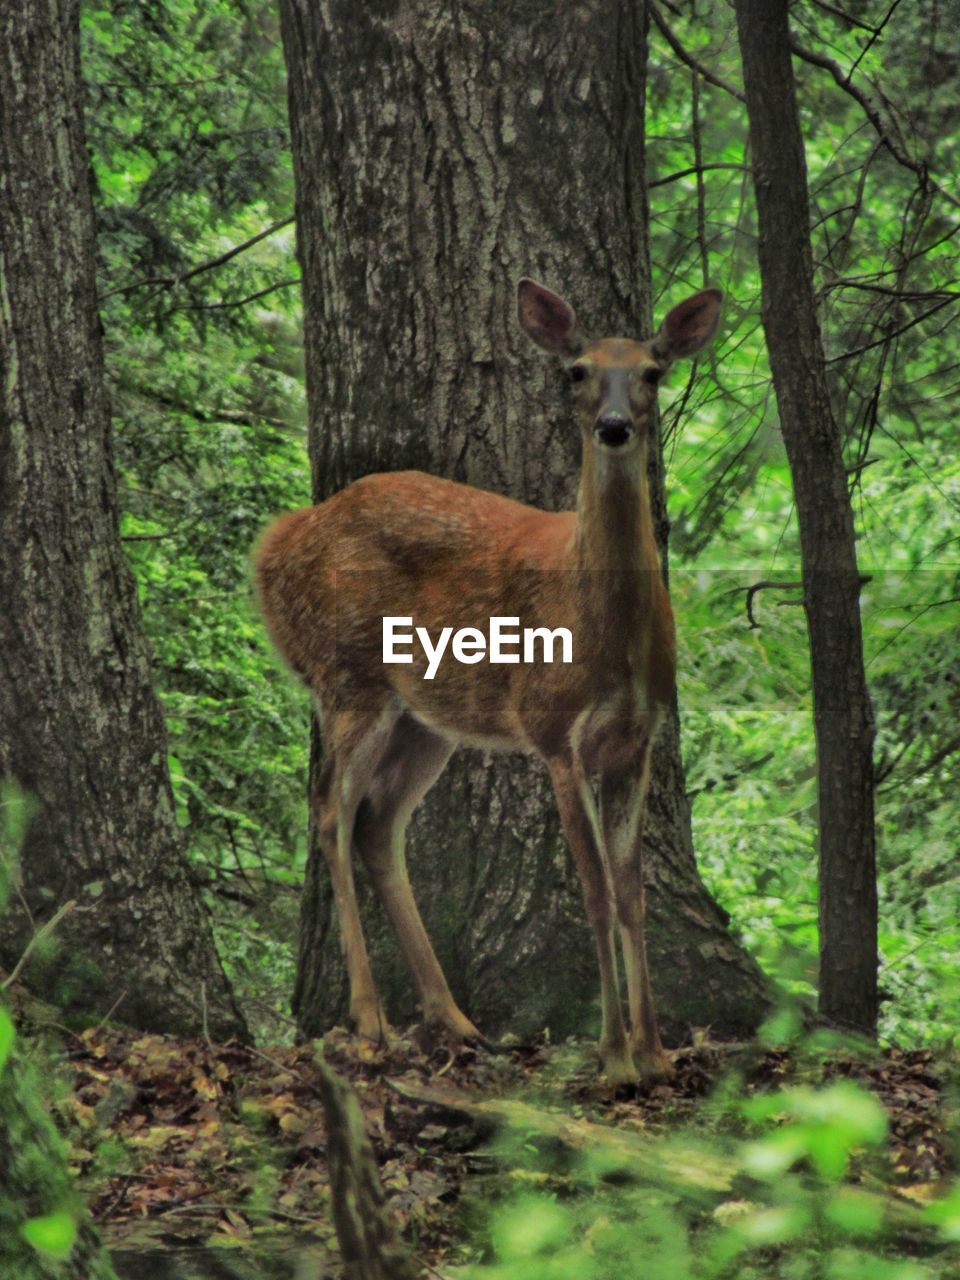 DEER STANDING BY TREE IN FOREST